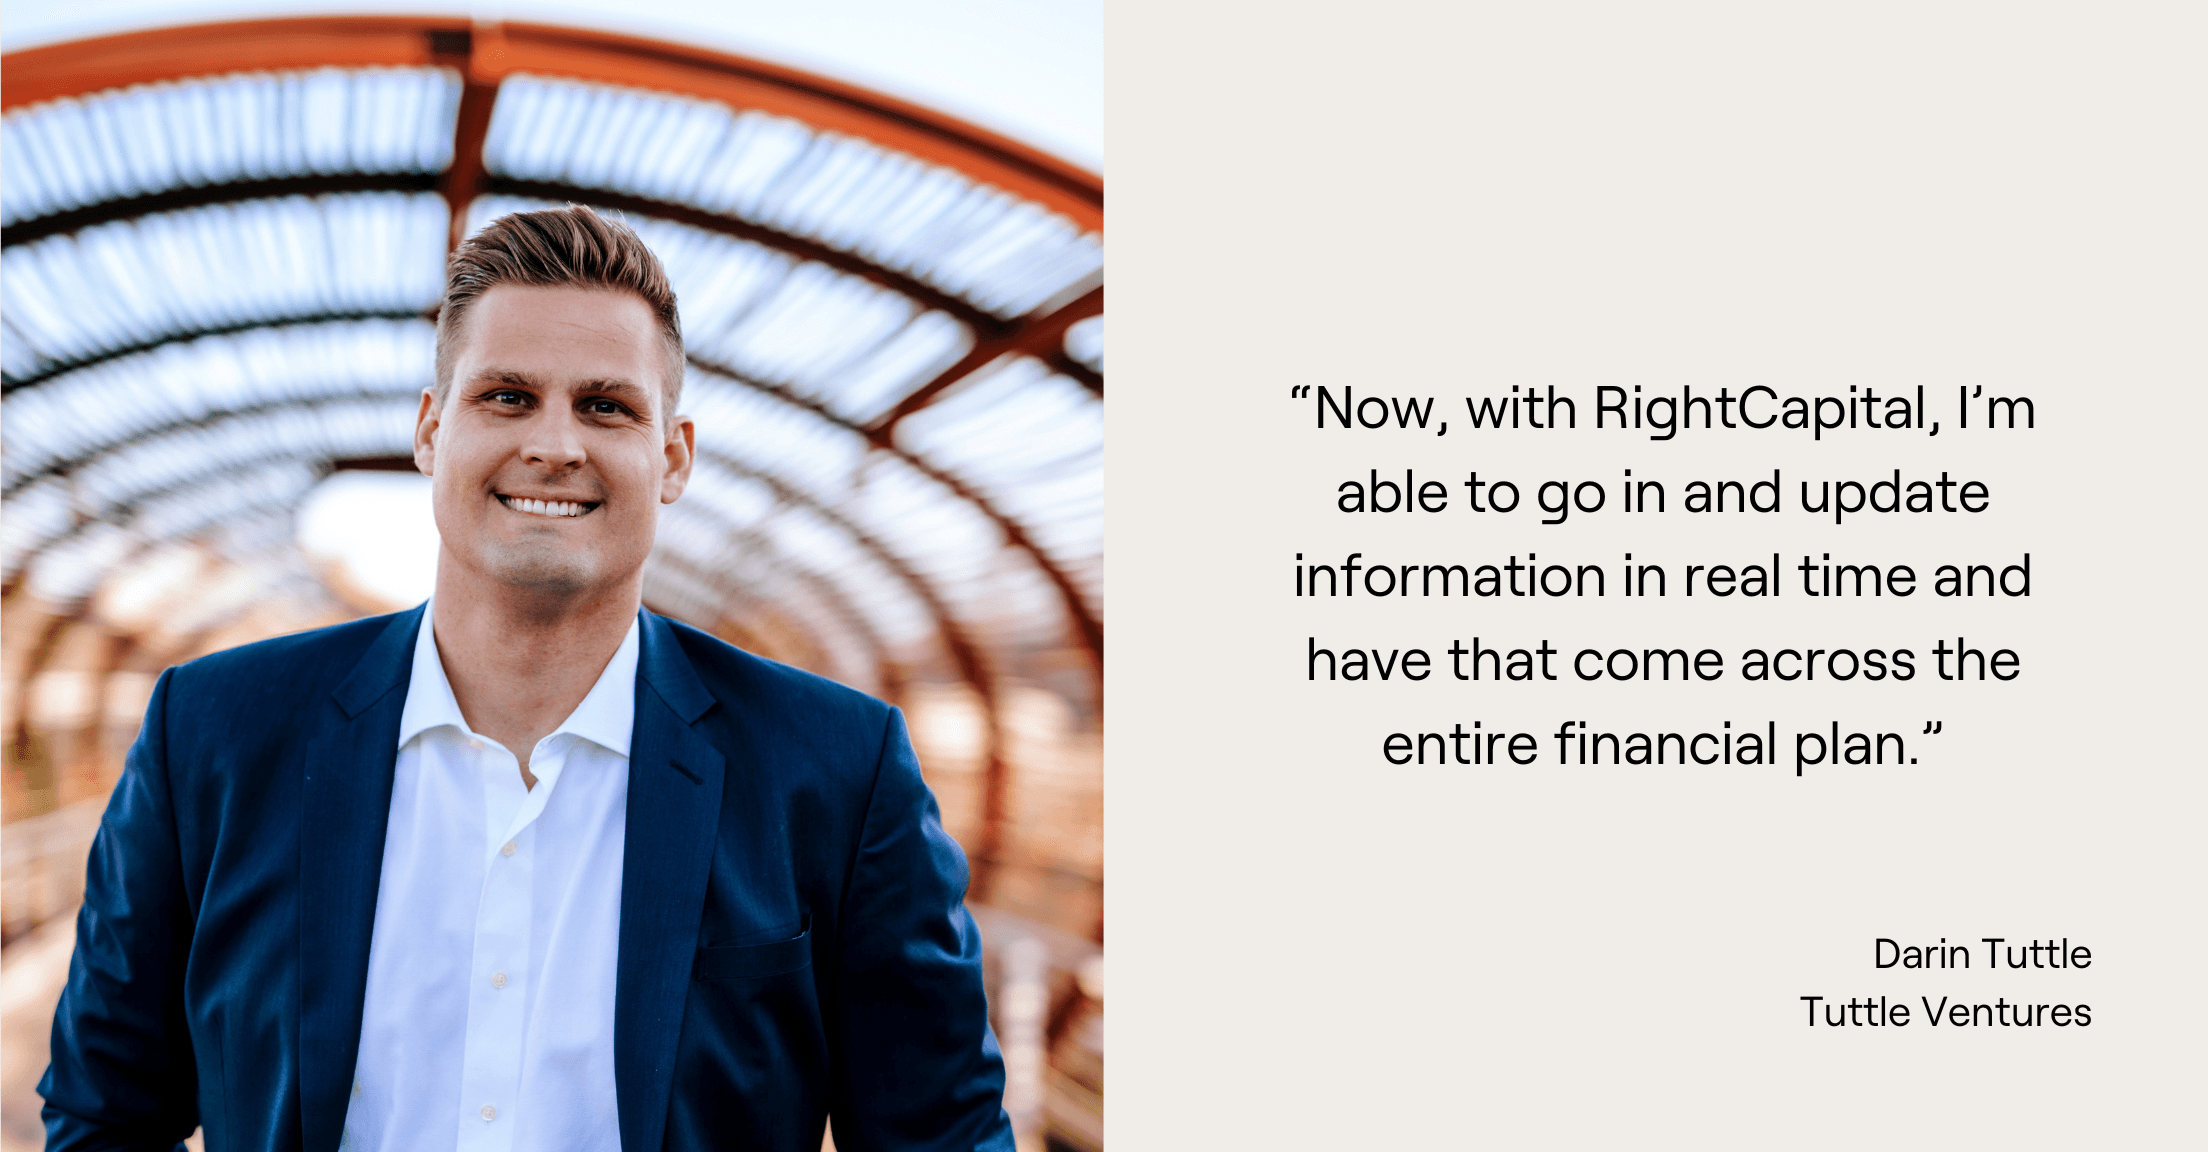 Headshot of Darin Tuttle of Tuttle Ventures and quote, “Now, with RightCapital, I’m able to go in and update information in real time and have that come across the entire financial plan.”